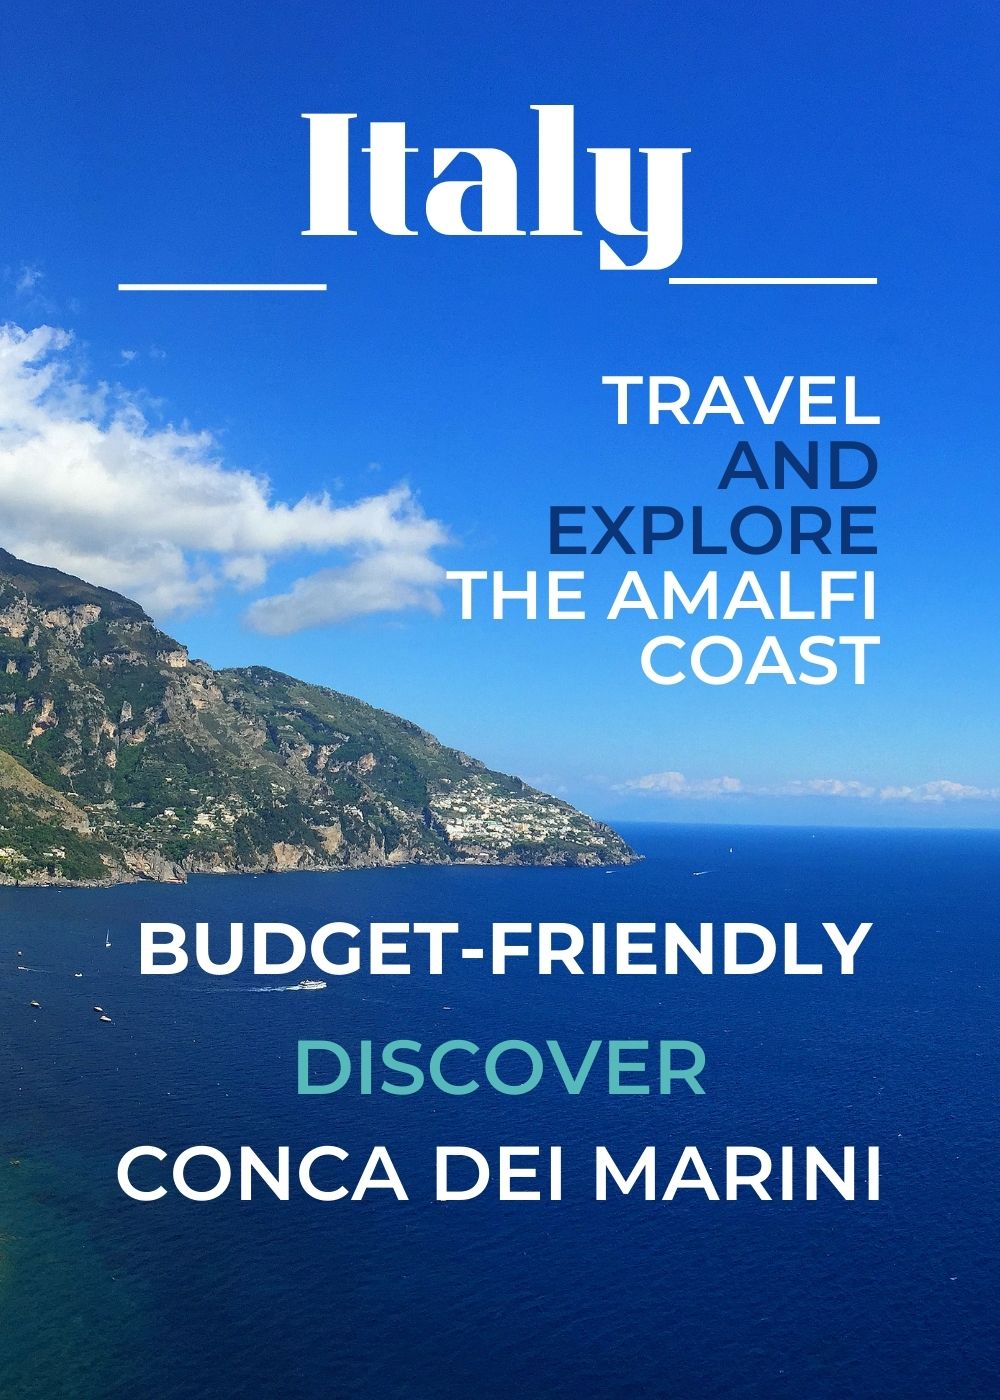 how to travel the Amalfi Coast on a budget save cheap travel cost saving tips